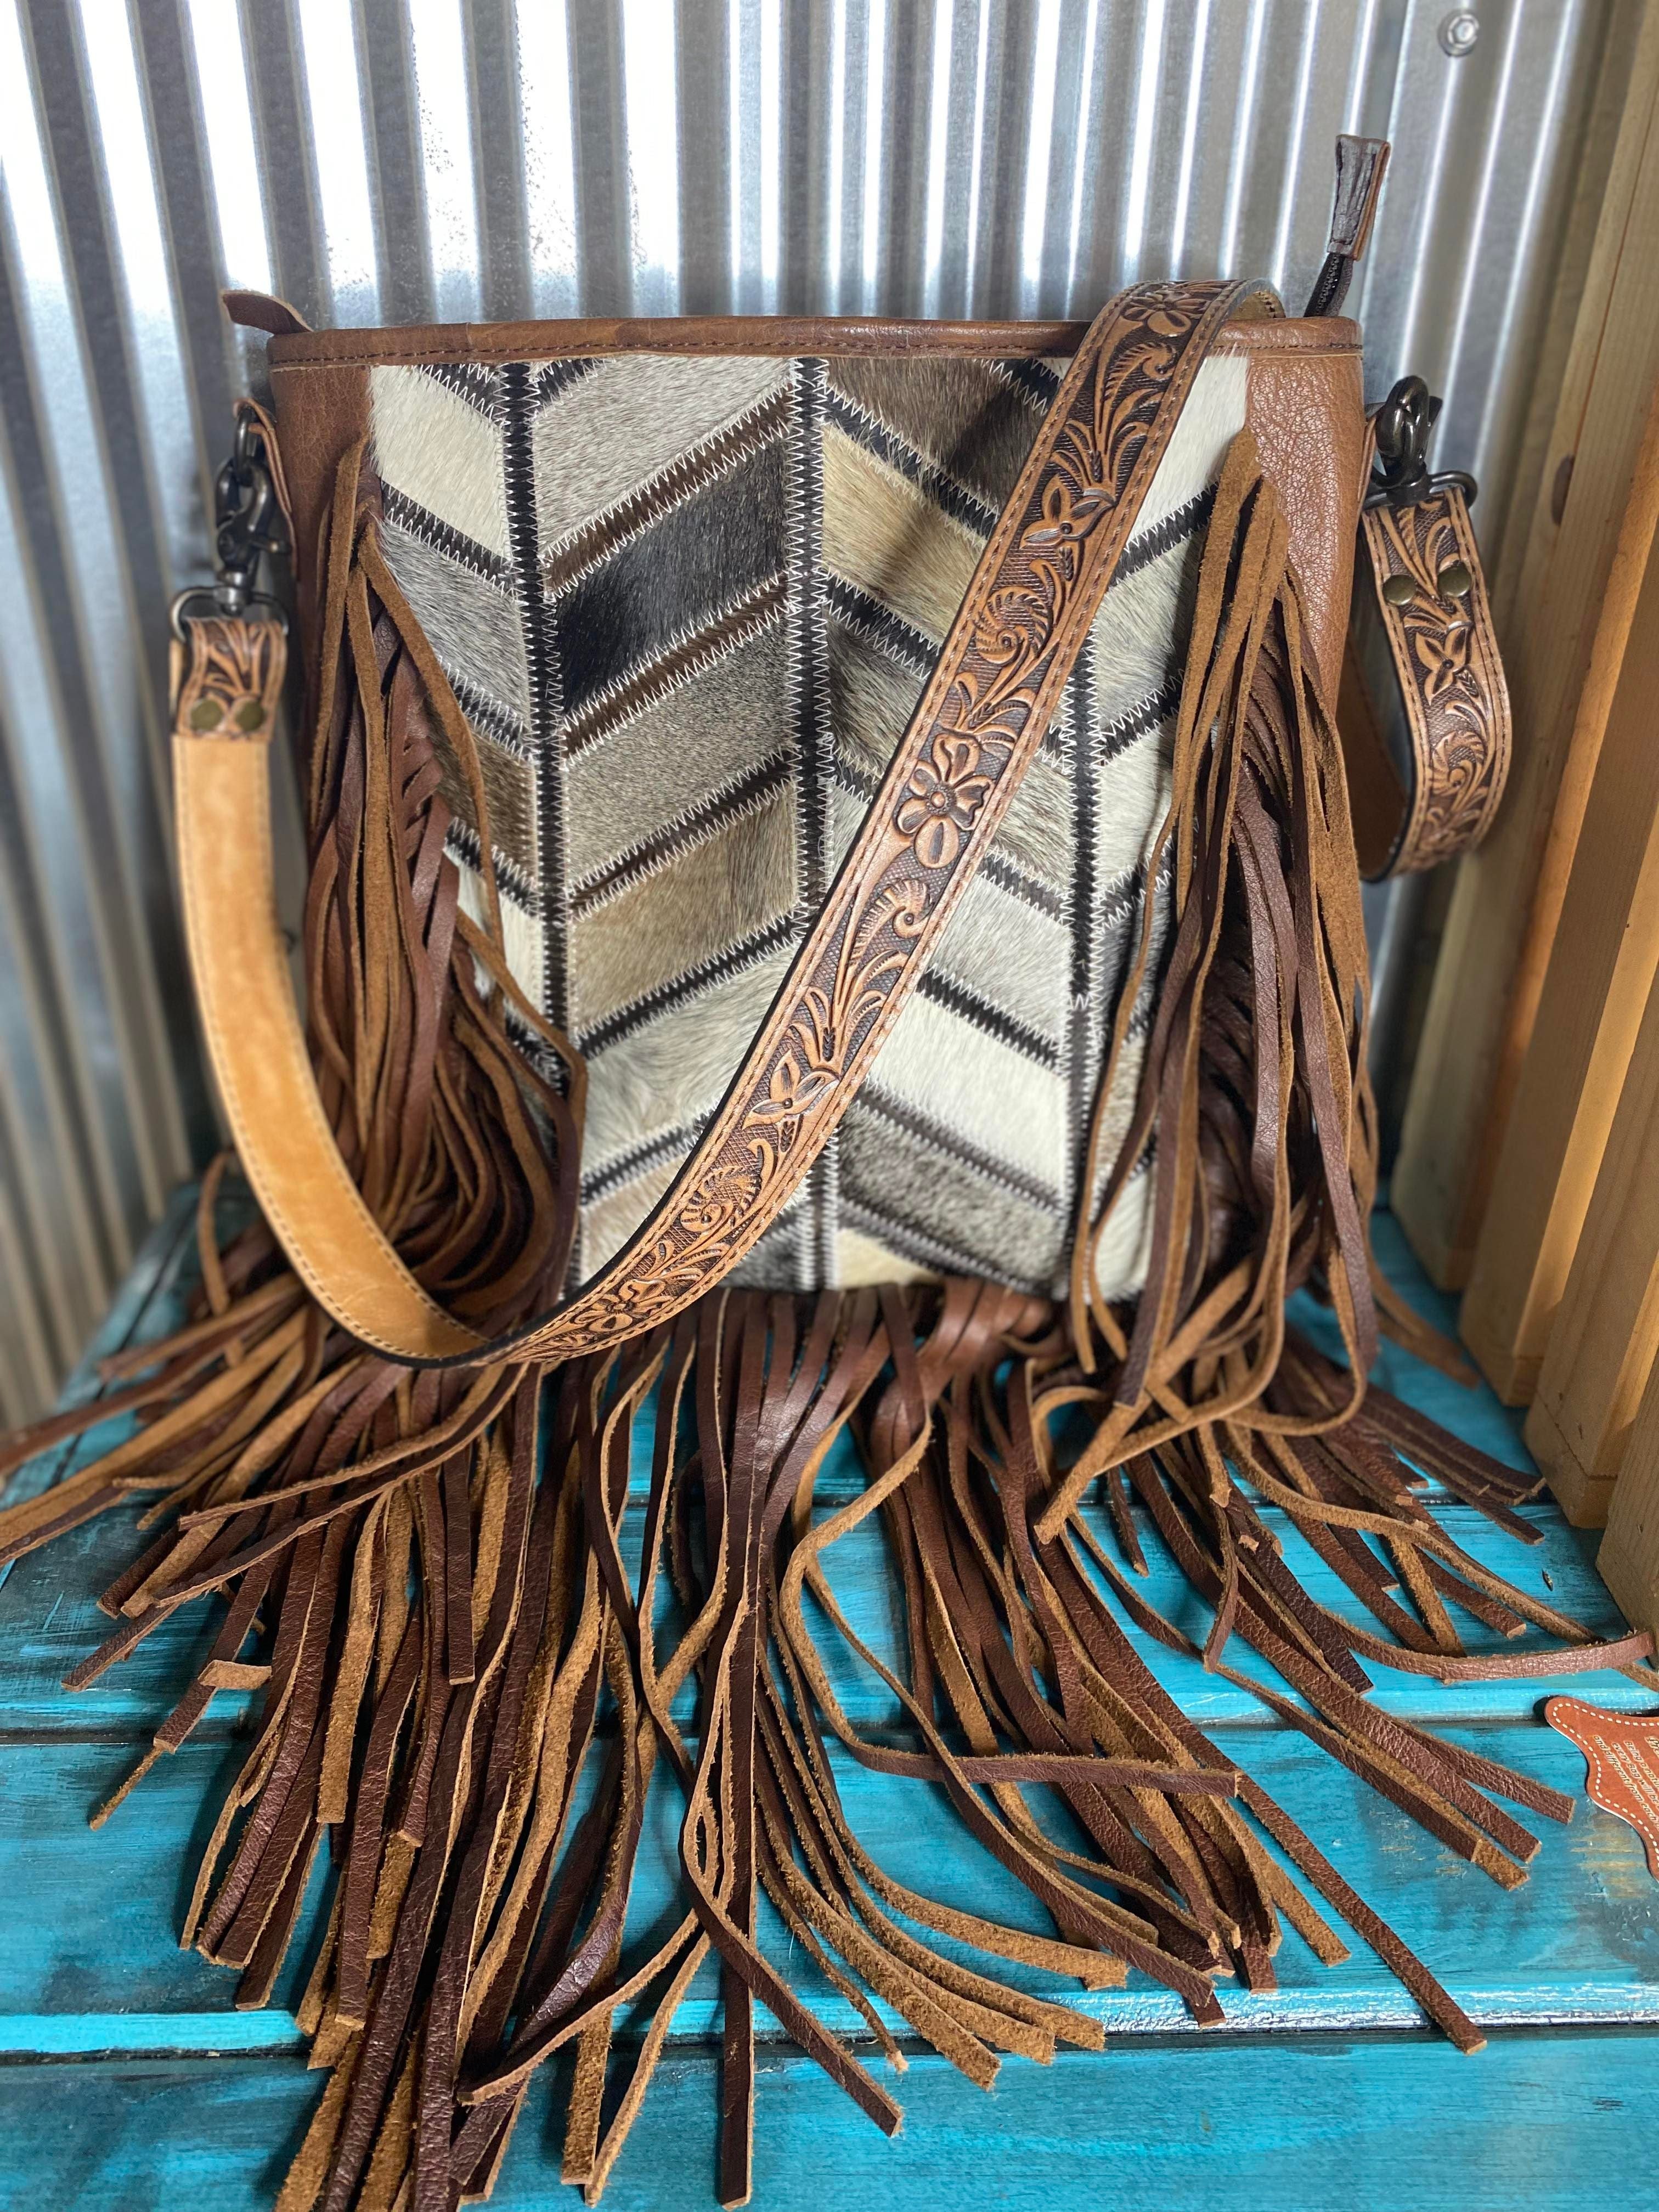 Western Fringe Purse in Native Wool and Leather Cowgirl 